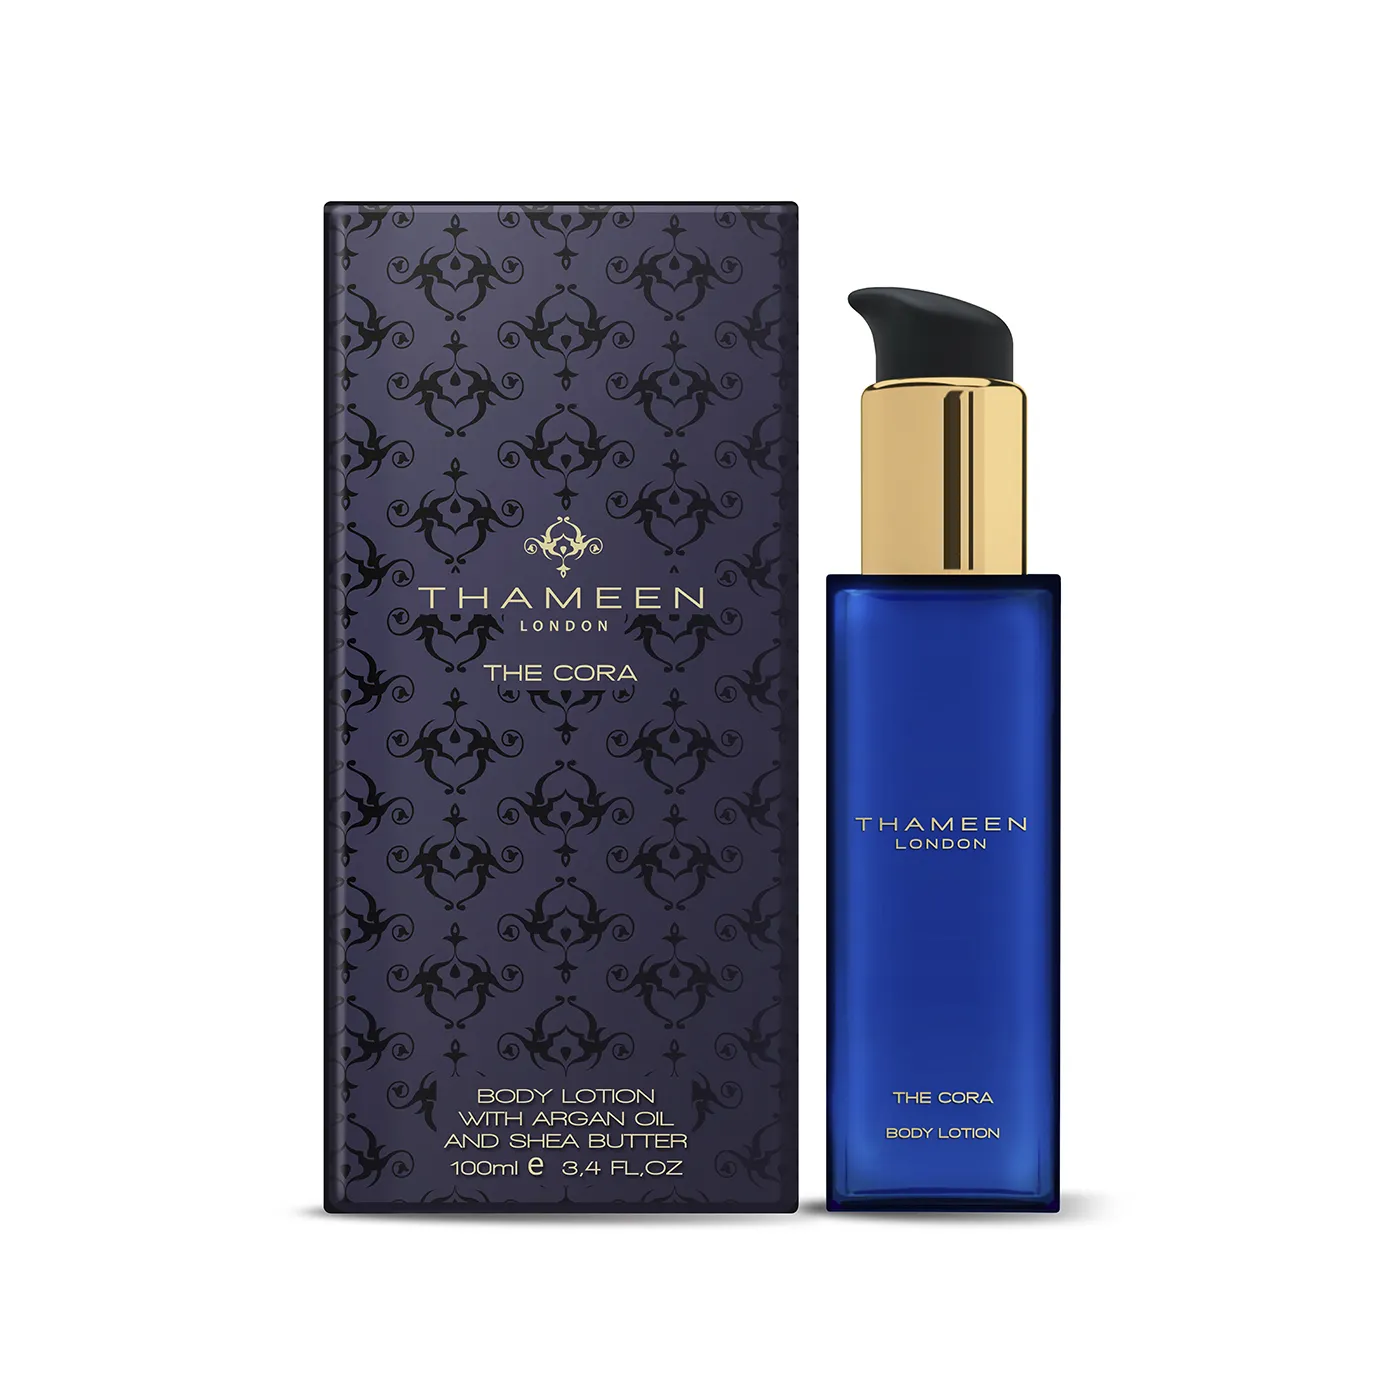 Thameen London - The Cora - Body Lotion